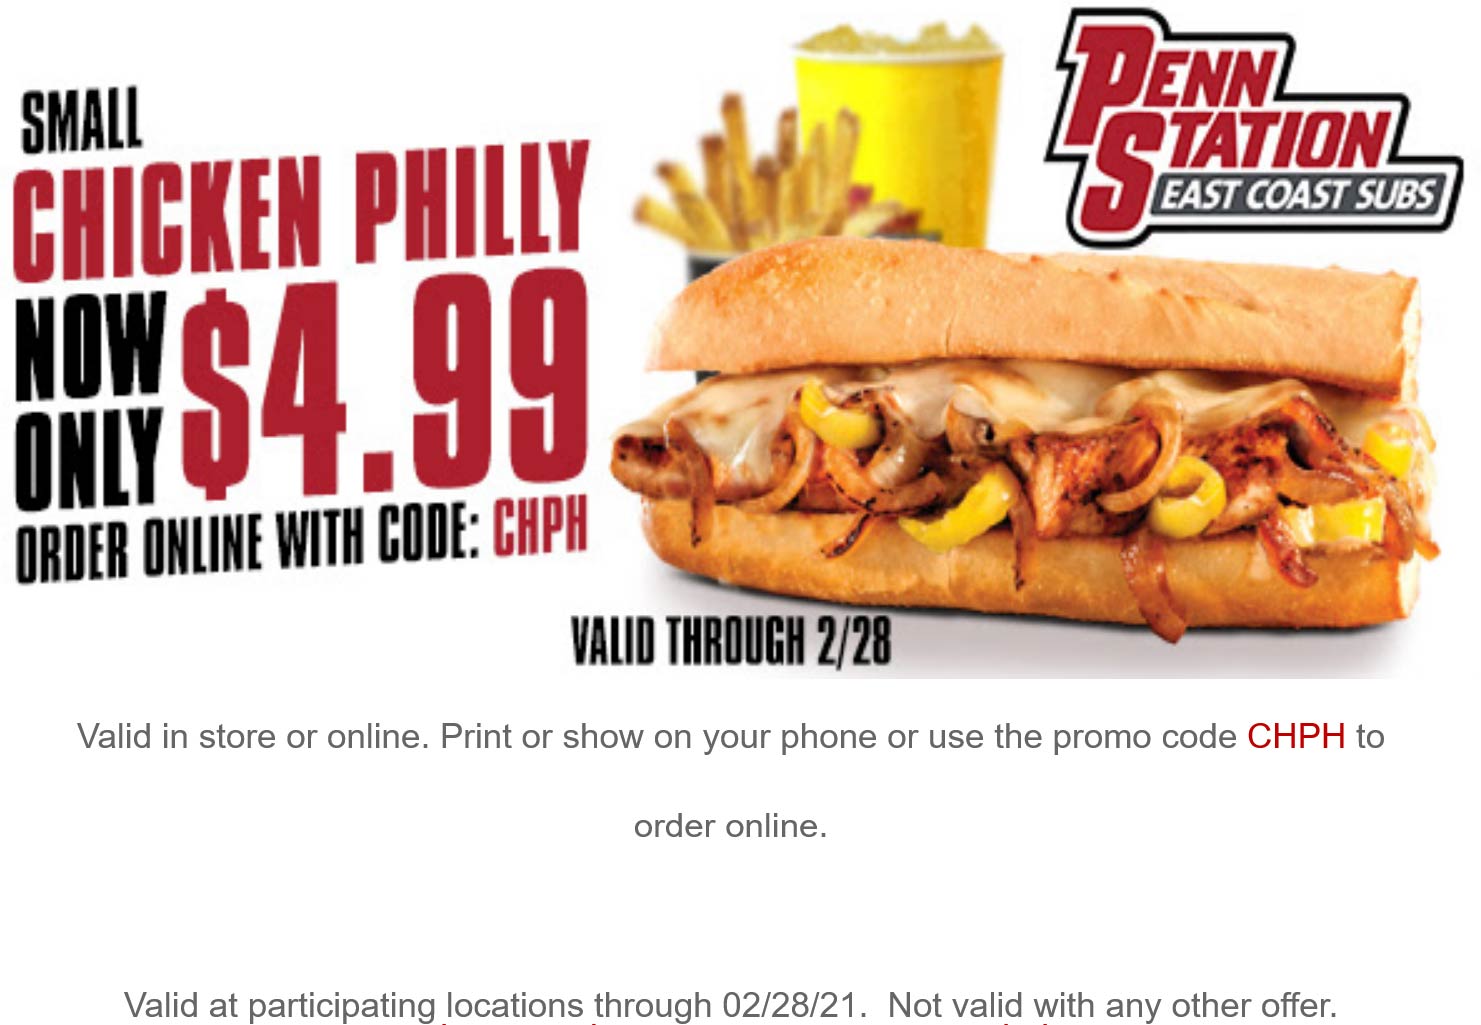 [July, 2021] 5 chicken philly sub sandwich at Penn Station via promo